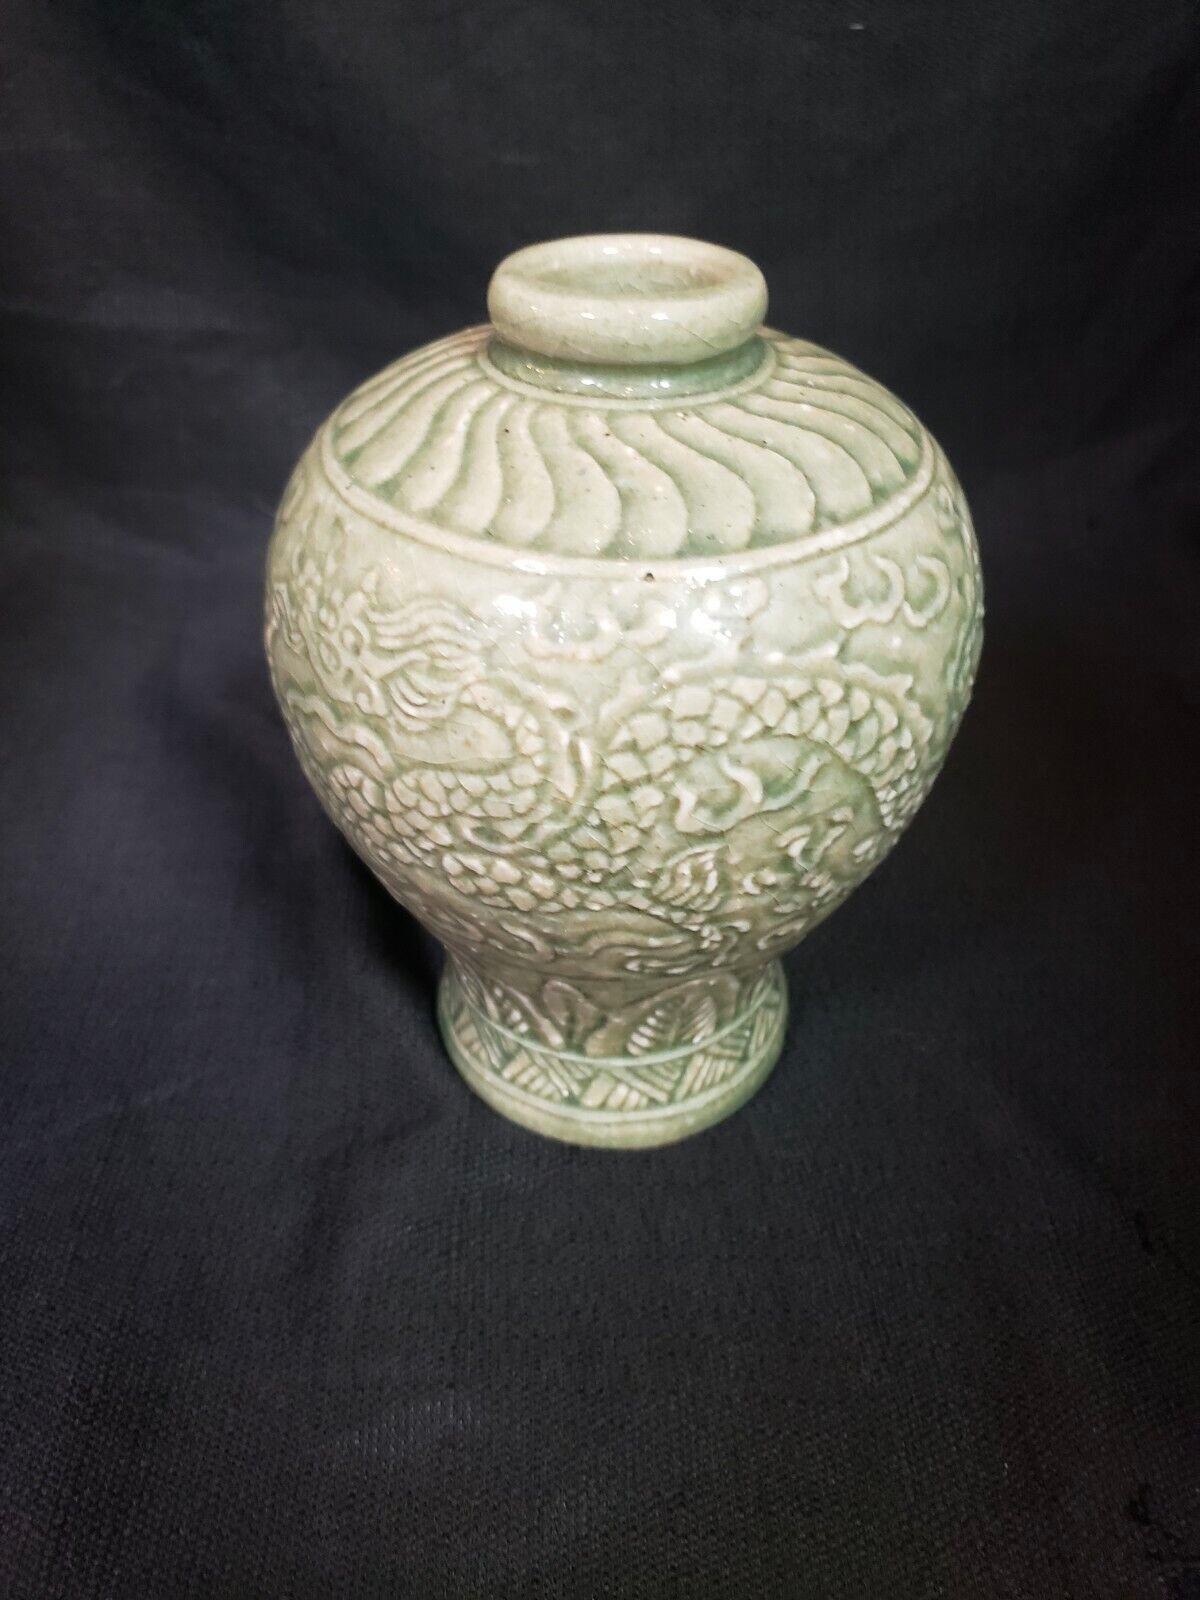 Early Ming dynasty “Dragon and Spring”floral pattern porcelain plum vase/ 
Item measurement: H: 7 inch approximate W: 5 inch
Material: porcelain 
Condition: As antique porcelain consider to be good condition,shows normal signs of wear and use.